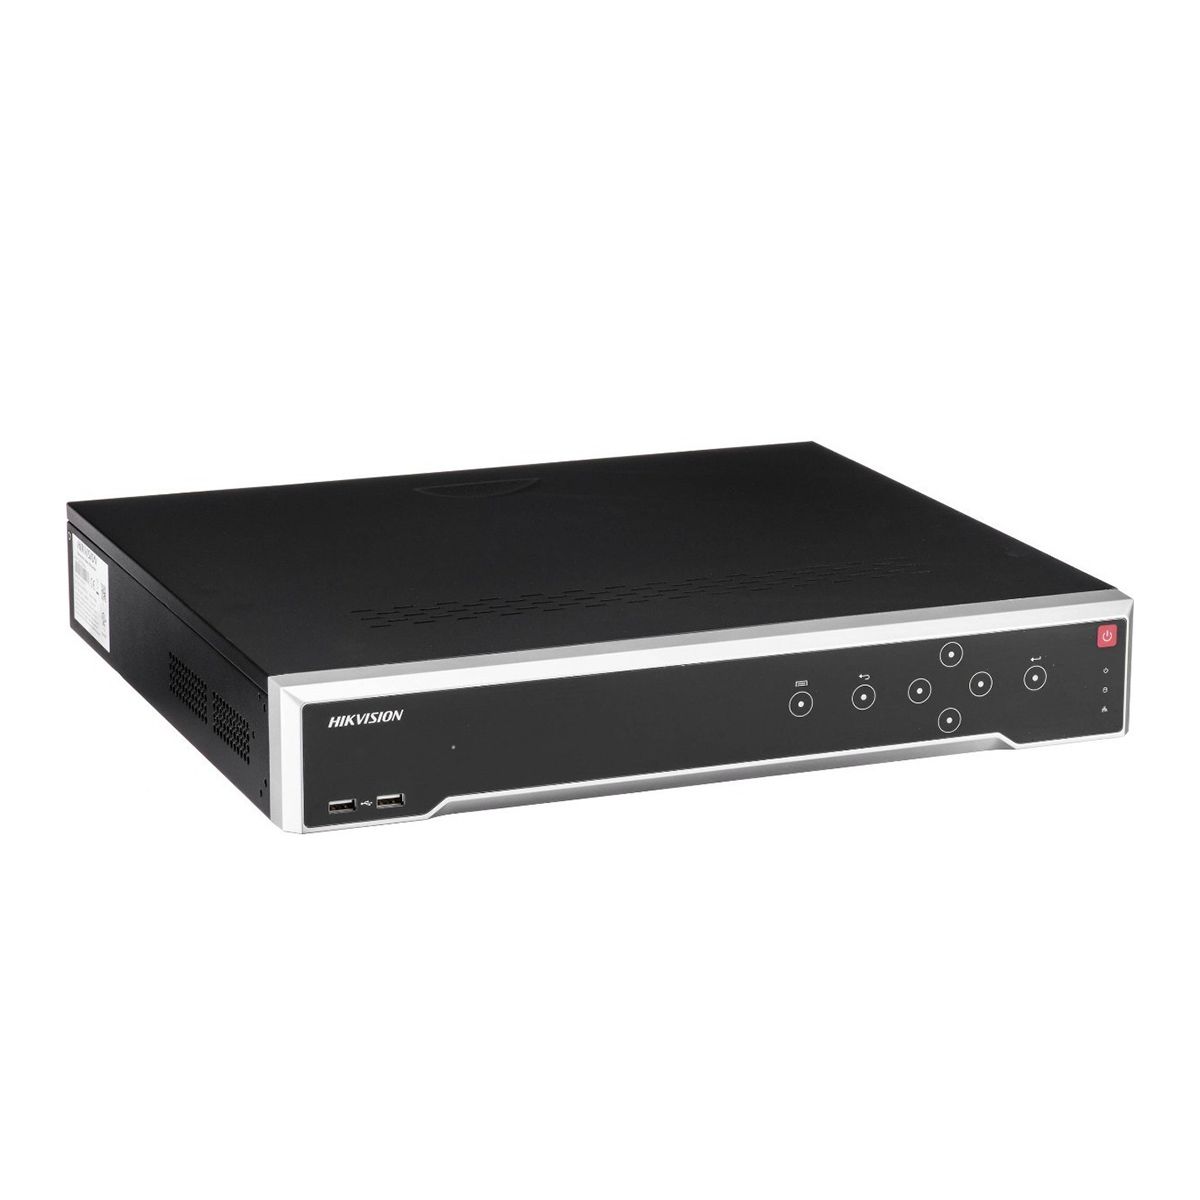 NVR Hikvision 32 canales DS-7732NI-I4